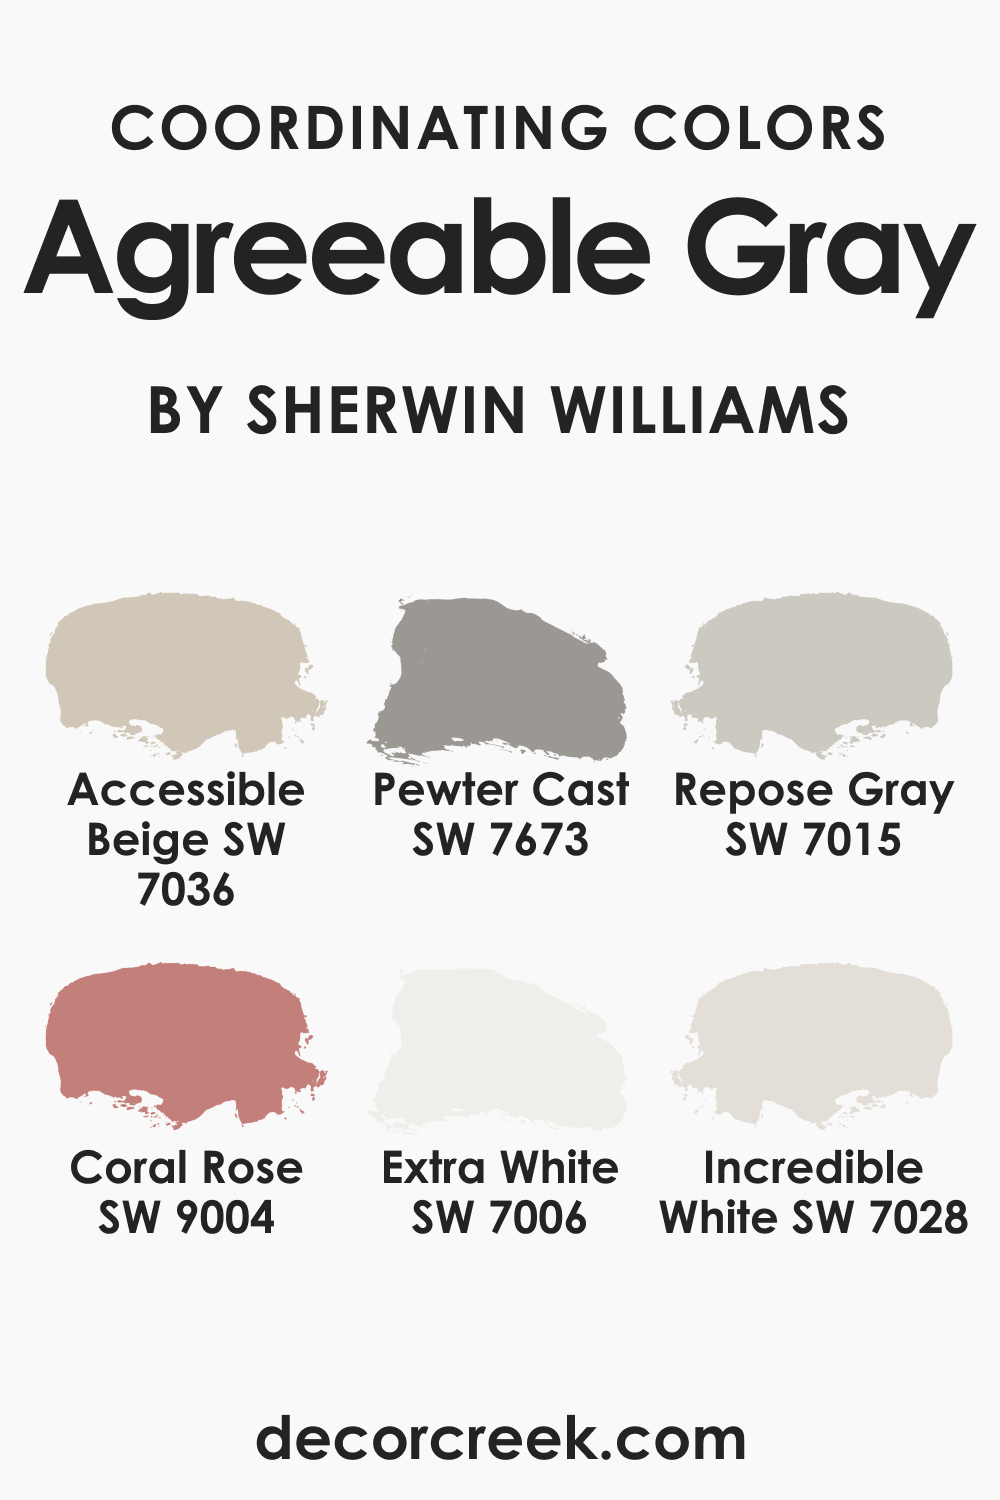 Coordinating Colors of SW 7029 Agreeable Gray